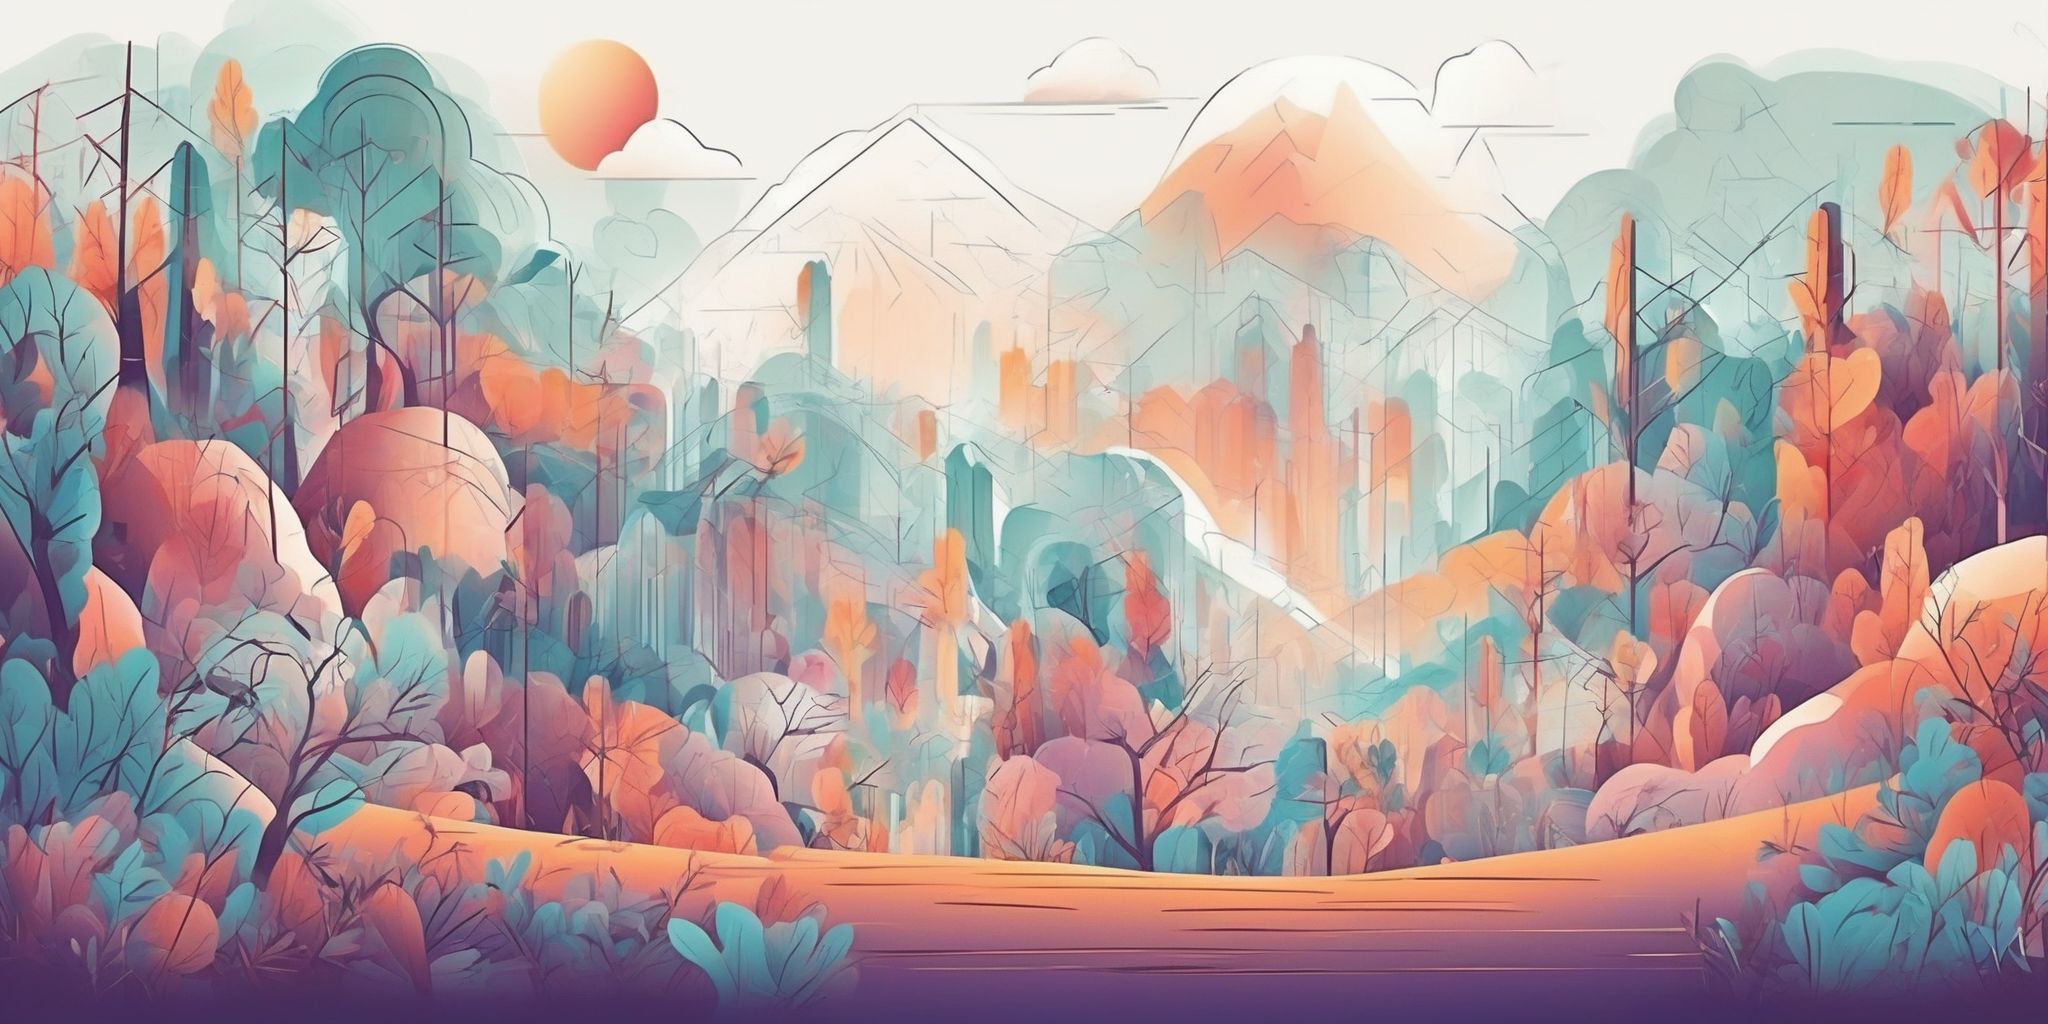 visual storytelling in illustration style with gradients and white background